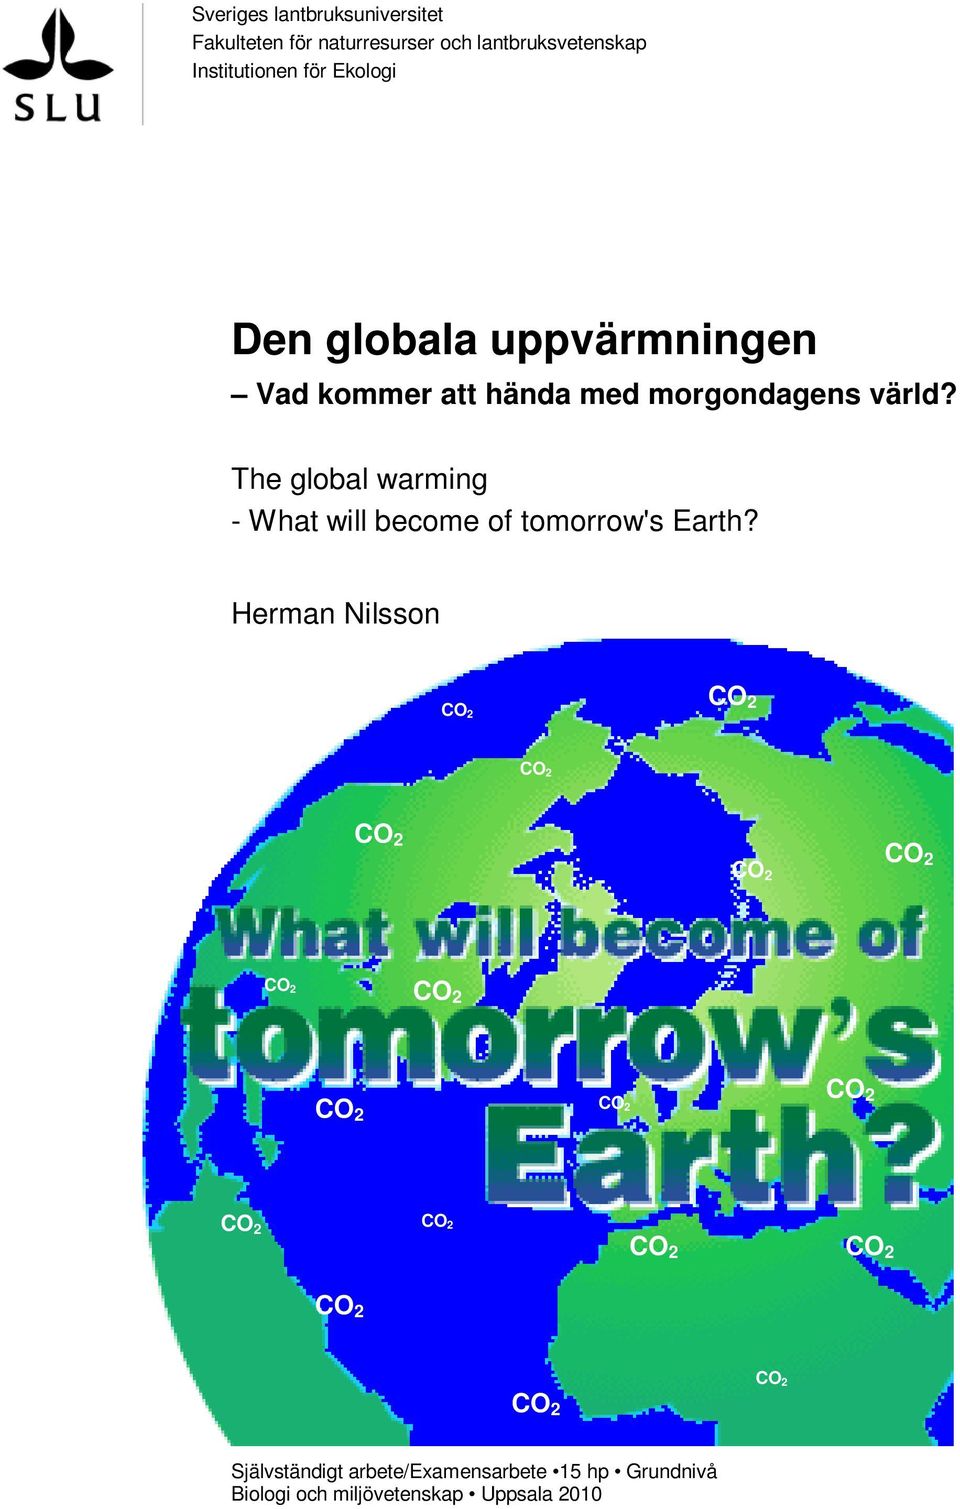 The global warming - What will become of tomorrow's Earth?